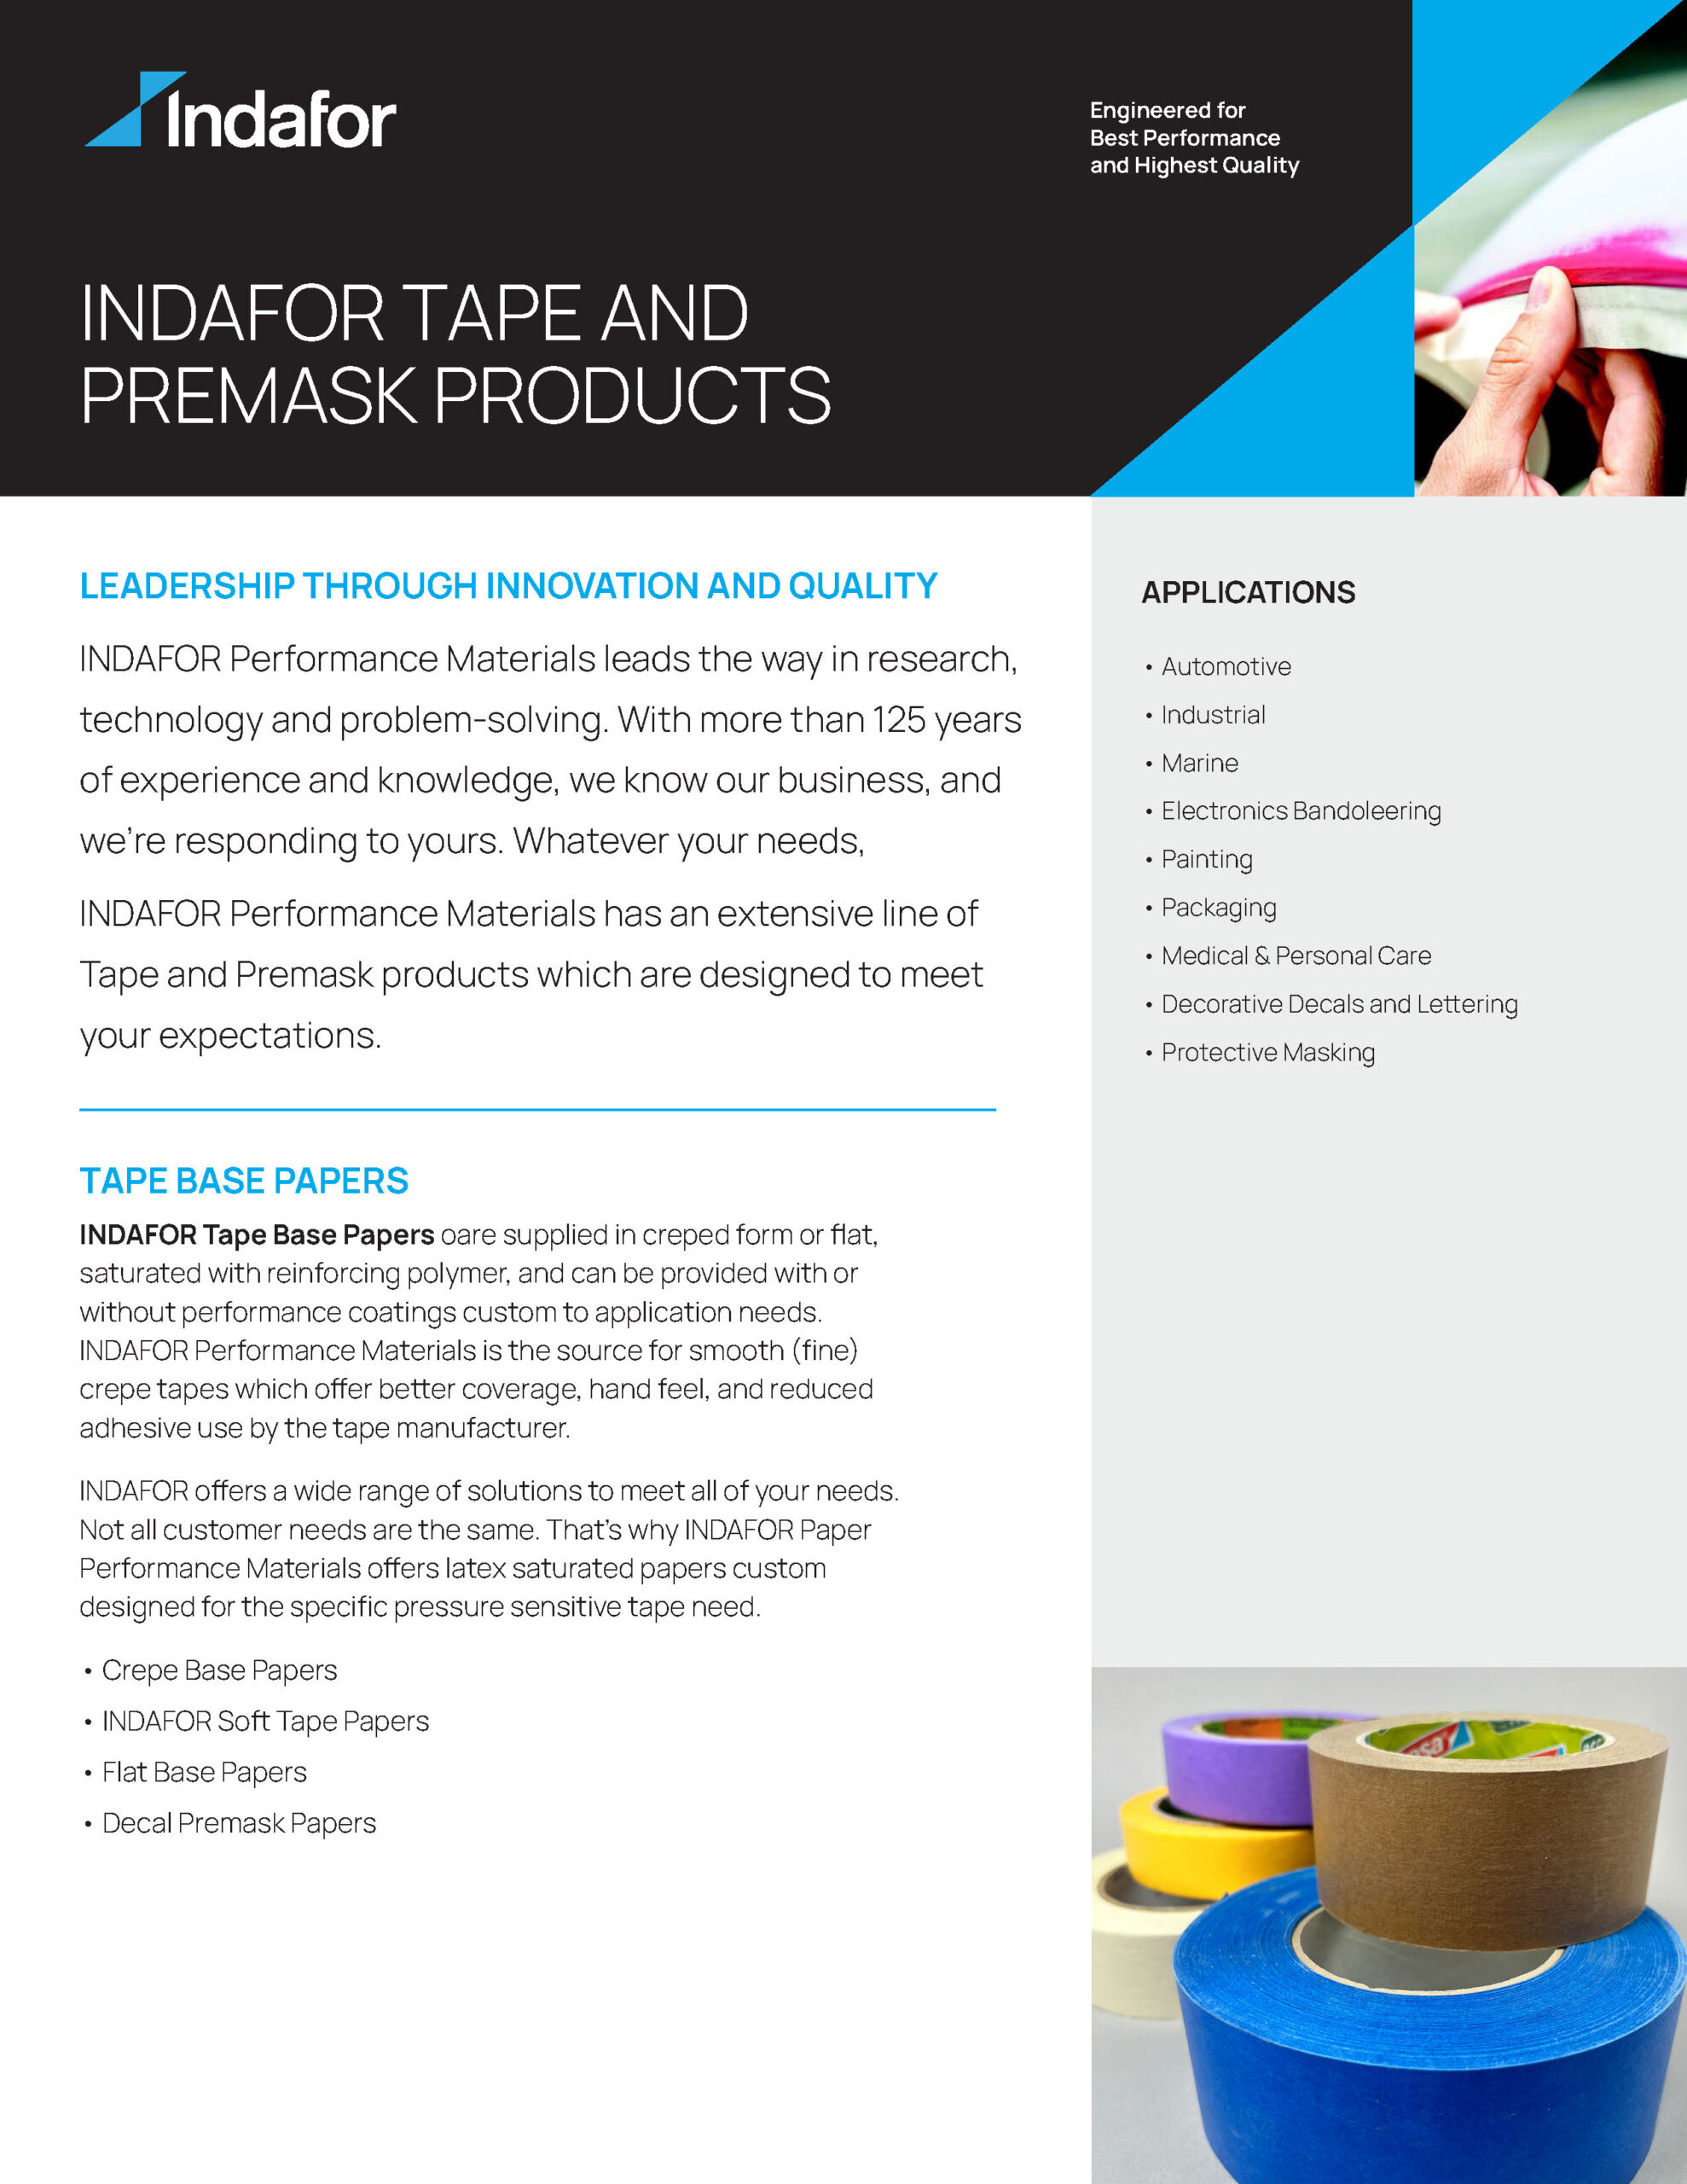 Indafor Tape Products